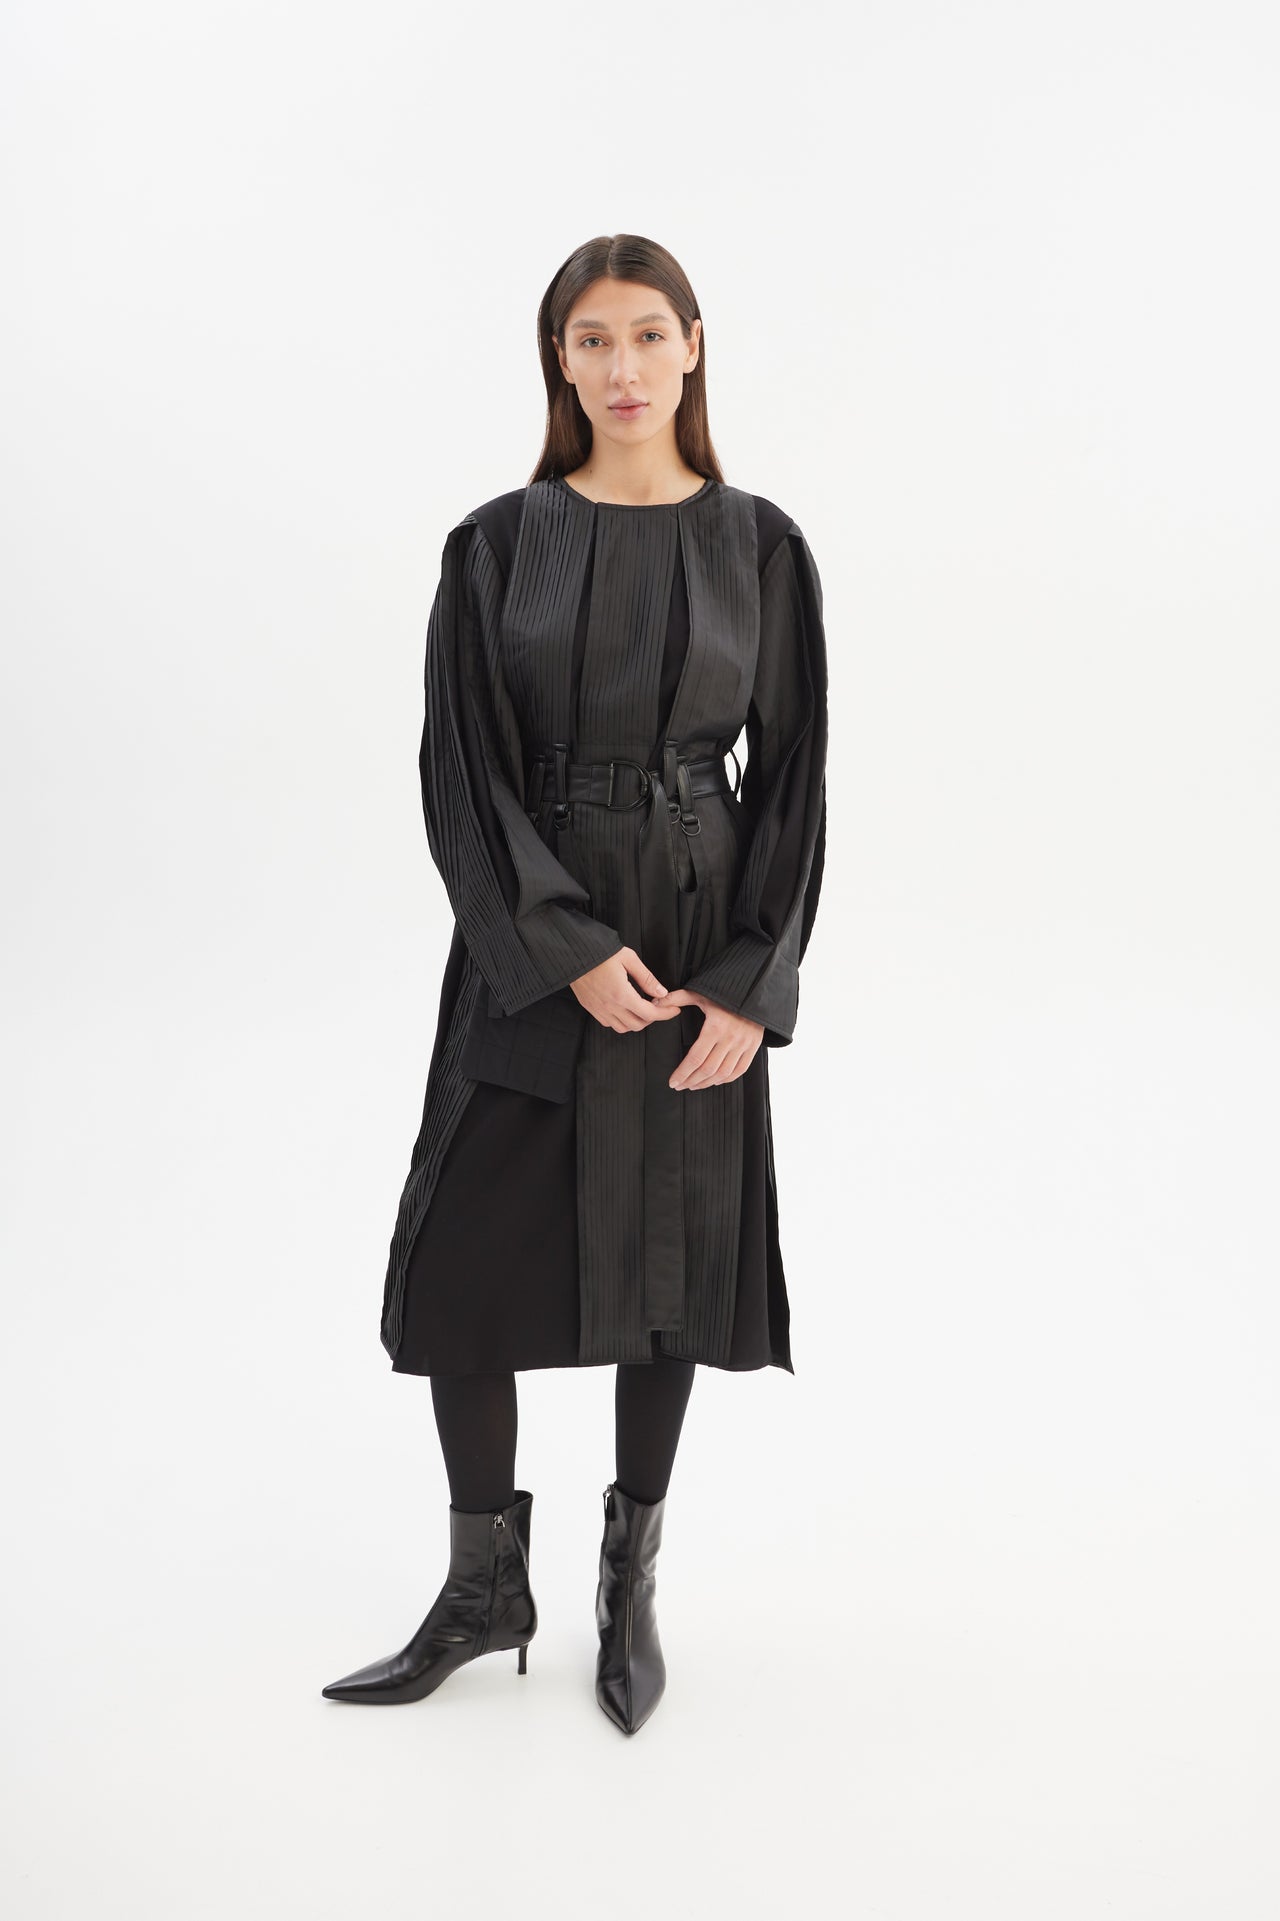 Long-Sleeved Midi H-line dress with pleated insert stripes, a detachable belt and pockets